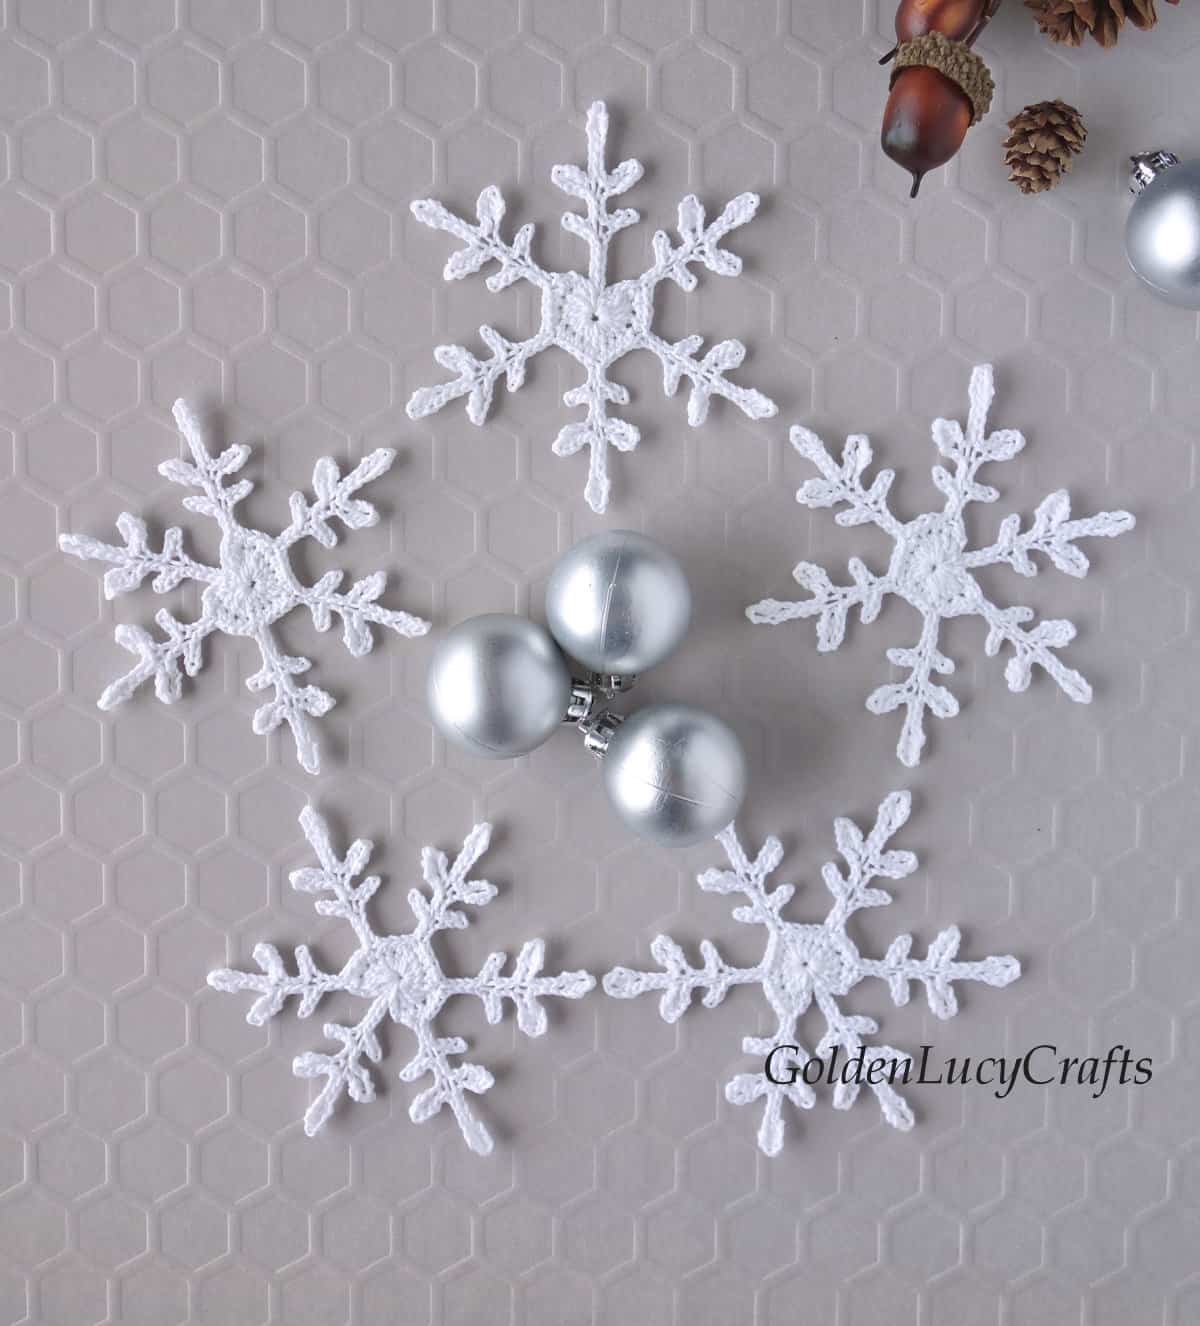 Crochet white snowflakes with heart center, small silver Christmas ball ornaments, small acorns and pinecones.